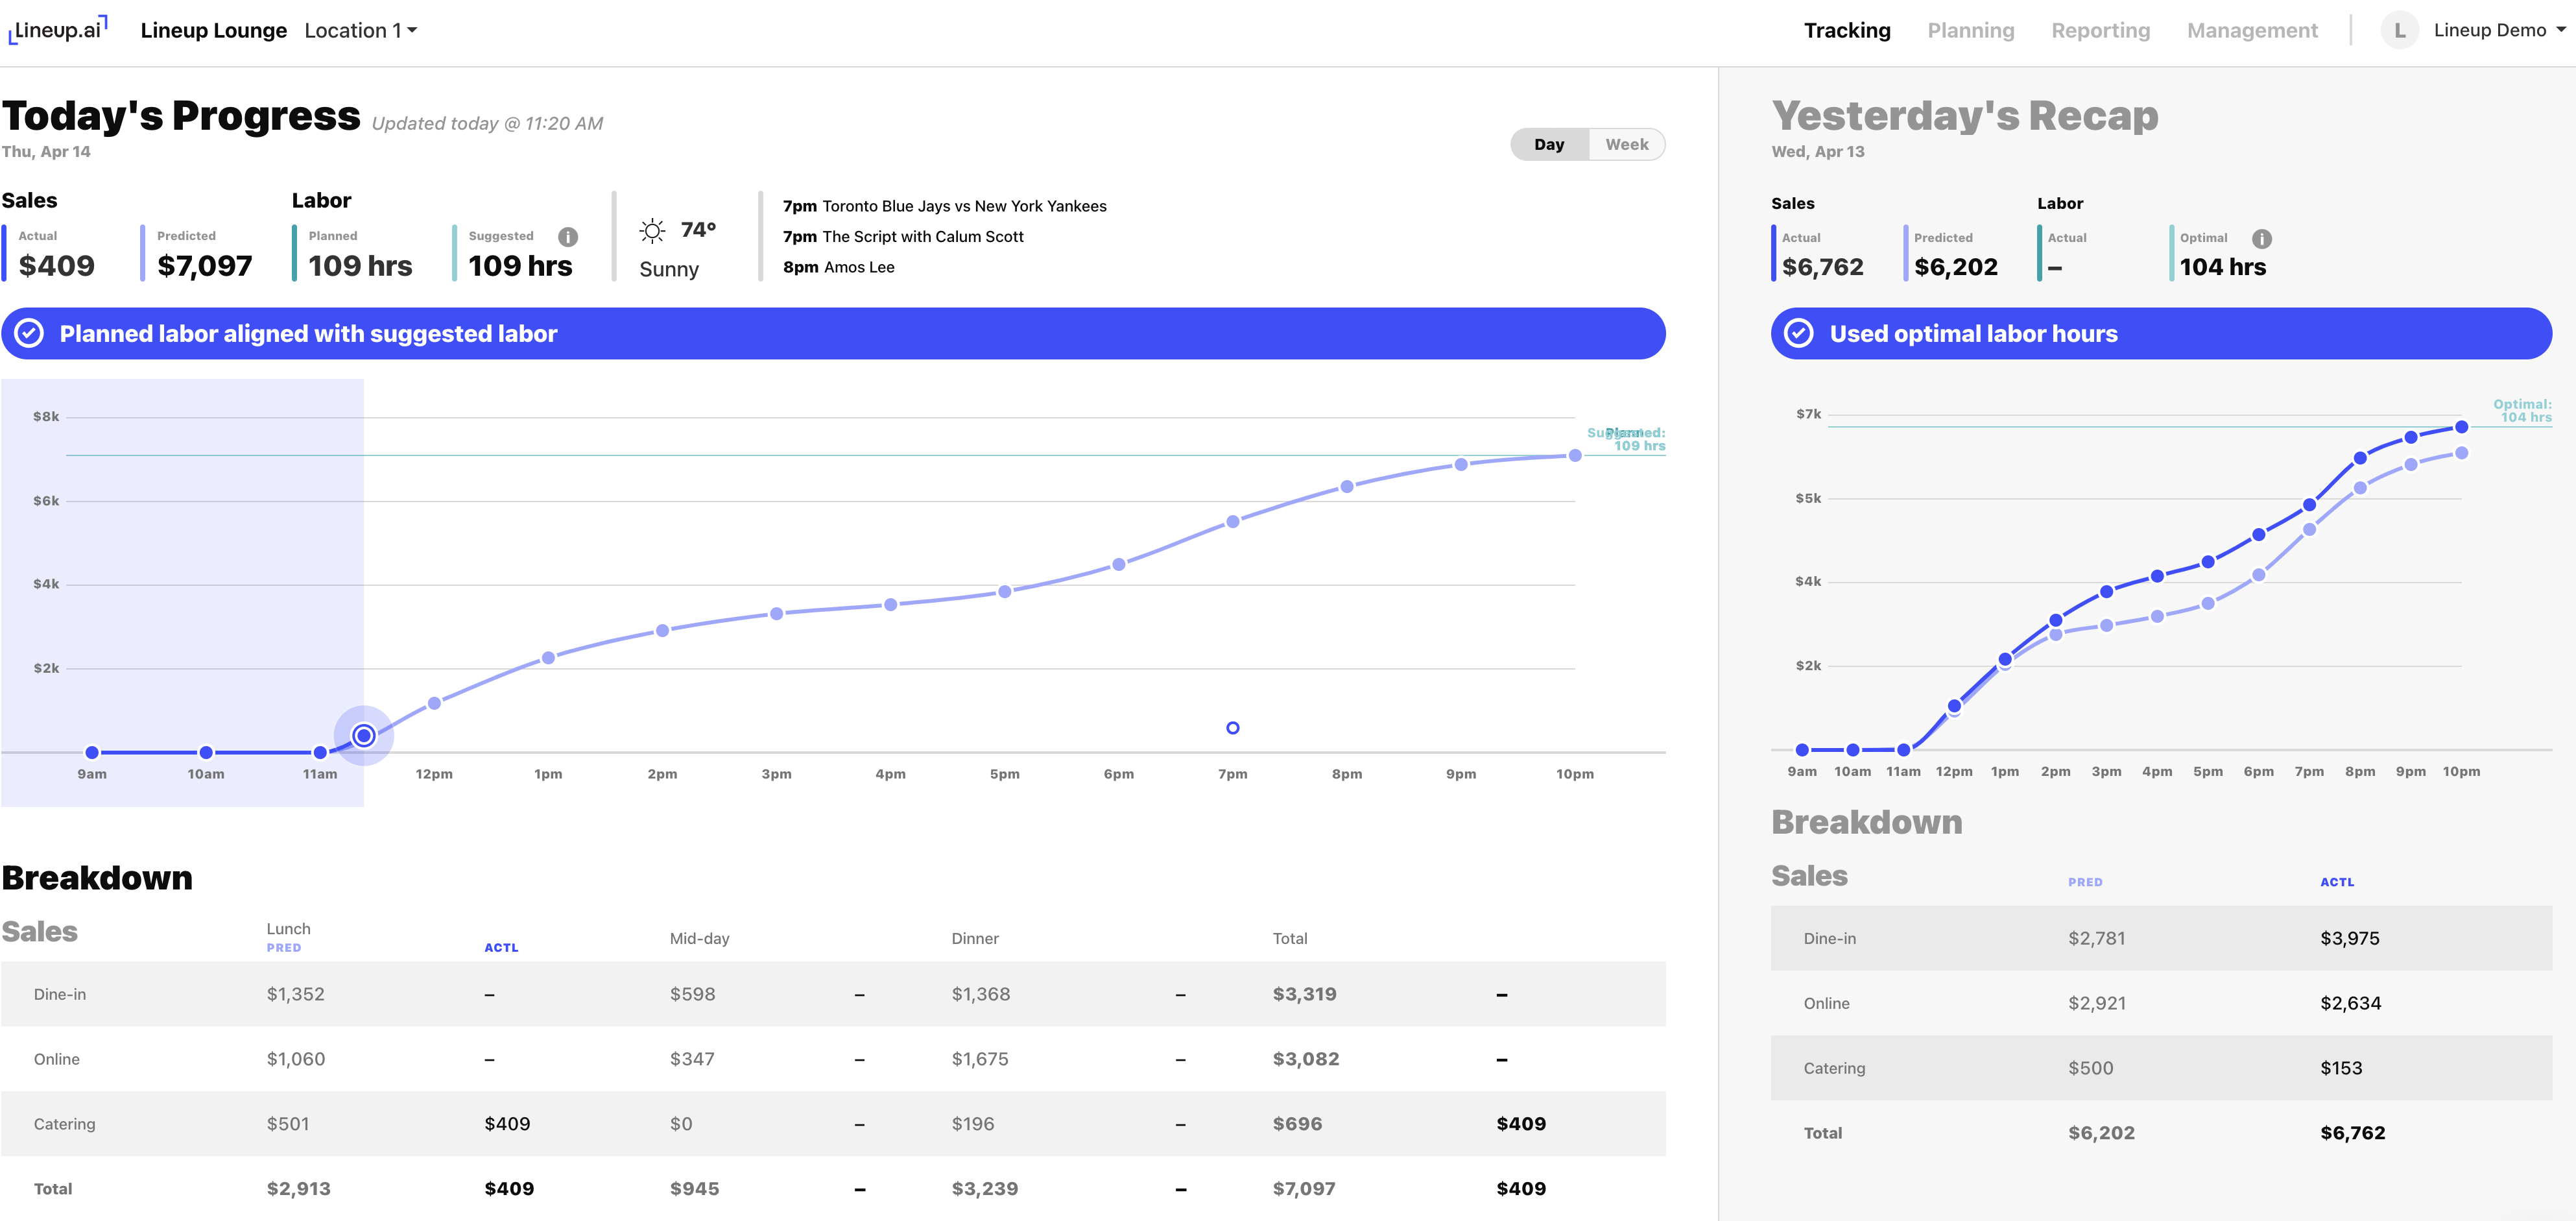 See revenue per channel in real-time from the Lineup.ai dashboard so you can make adjustments if needed.